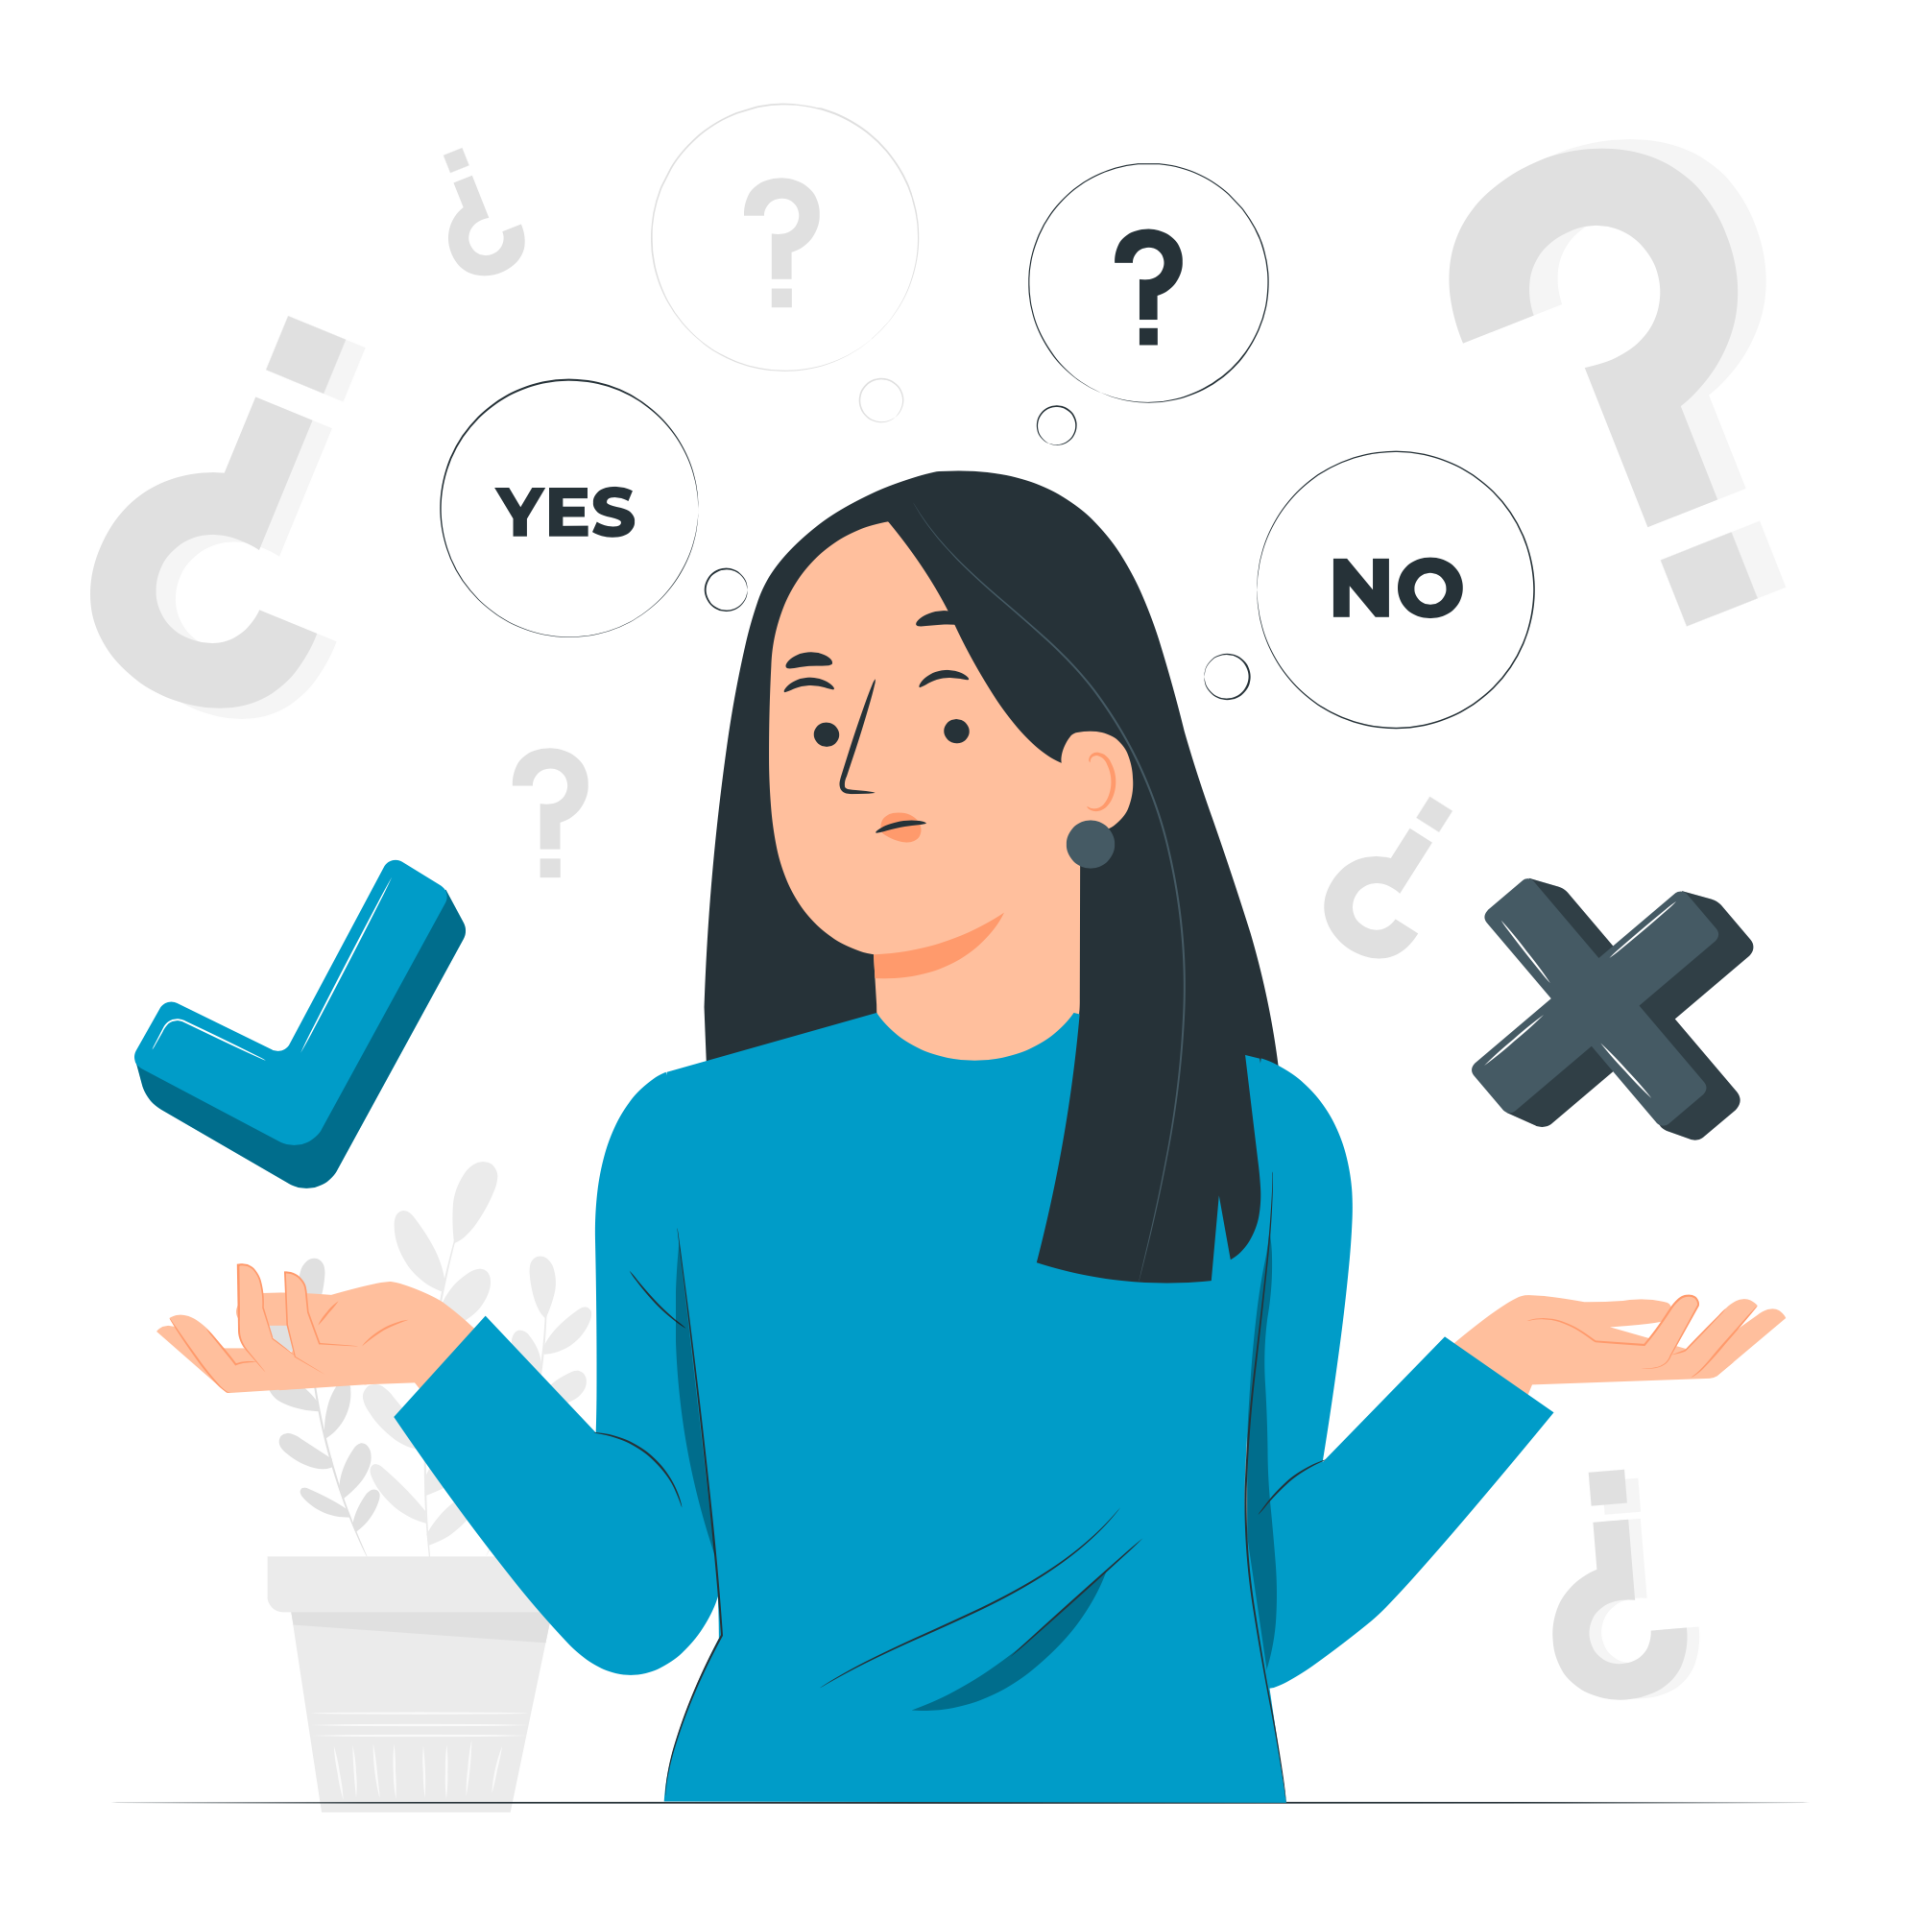 Illustration of a woman weighing 'yes' and 'no' options with checkmark and cross symbols under 'Conclusion' label.